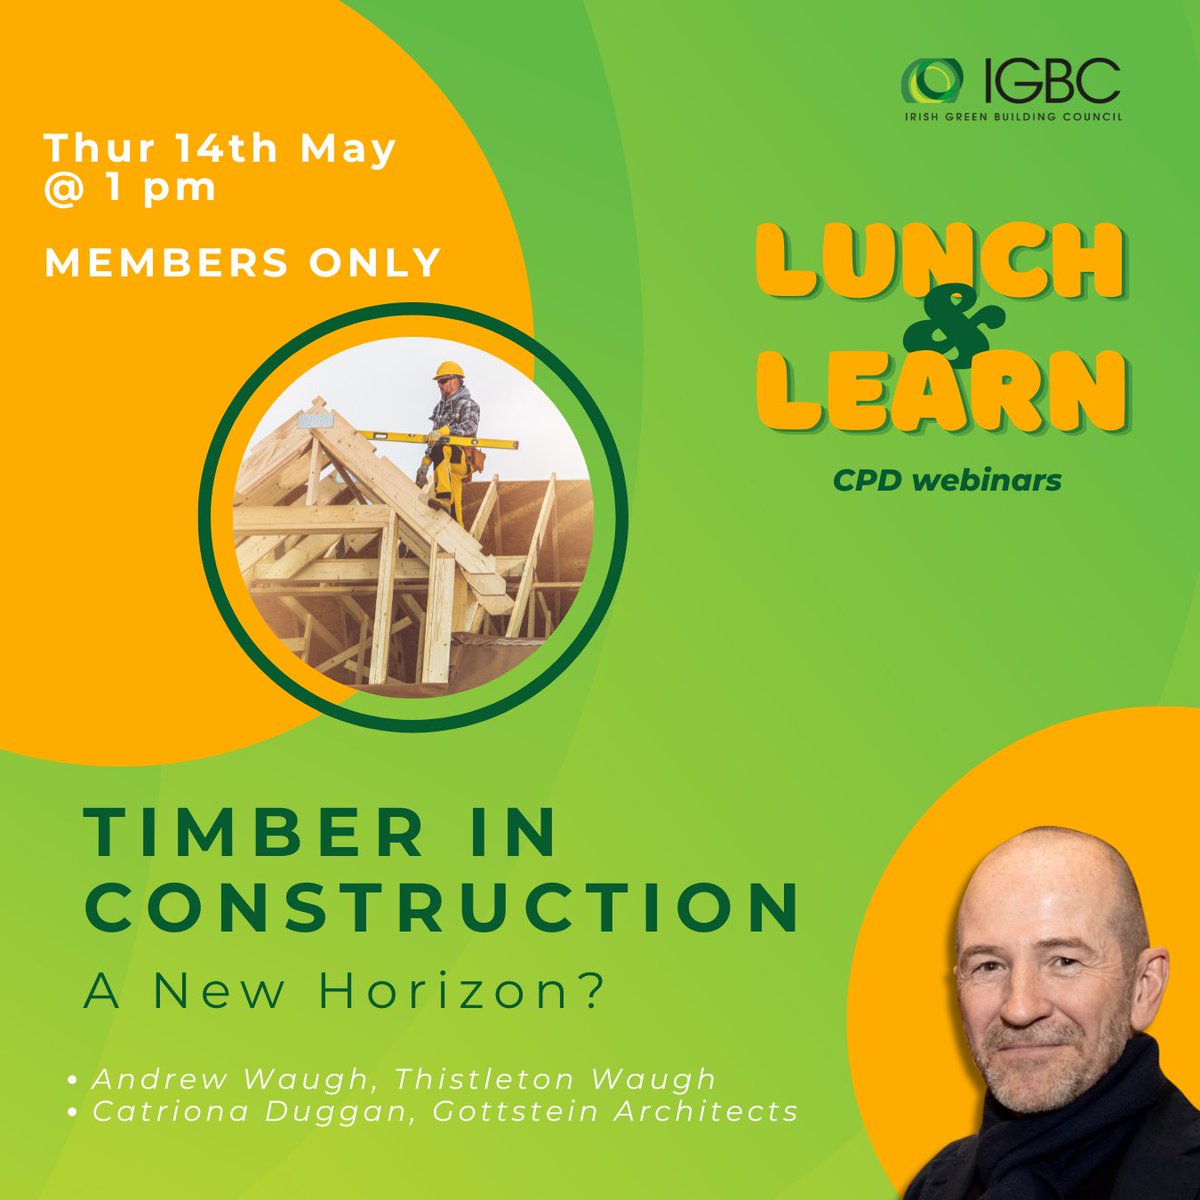 Back to work after a bank holiday? We've got a special treat just for our members! Join our CPD webinar next week, diving into #TimberinConstruction! 🏗️ 📅 Feb 14th, 1 pm. Exclusively for IGBC members. Secure your spot! ➡️ igbc.ie/events/timber-…